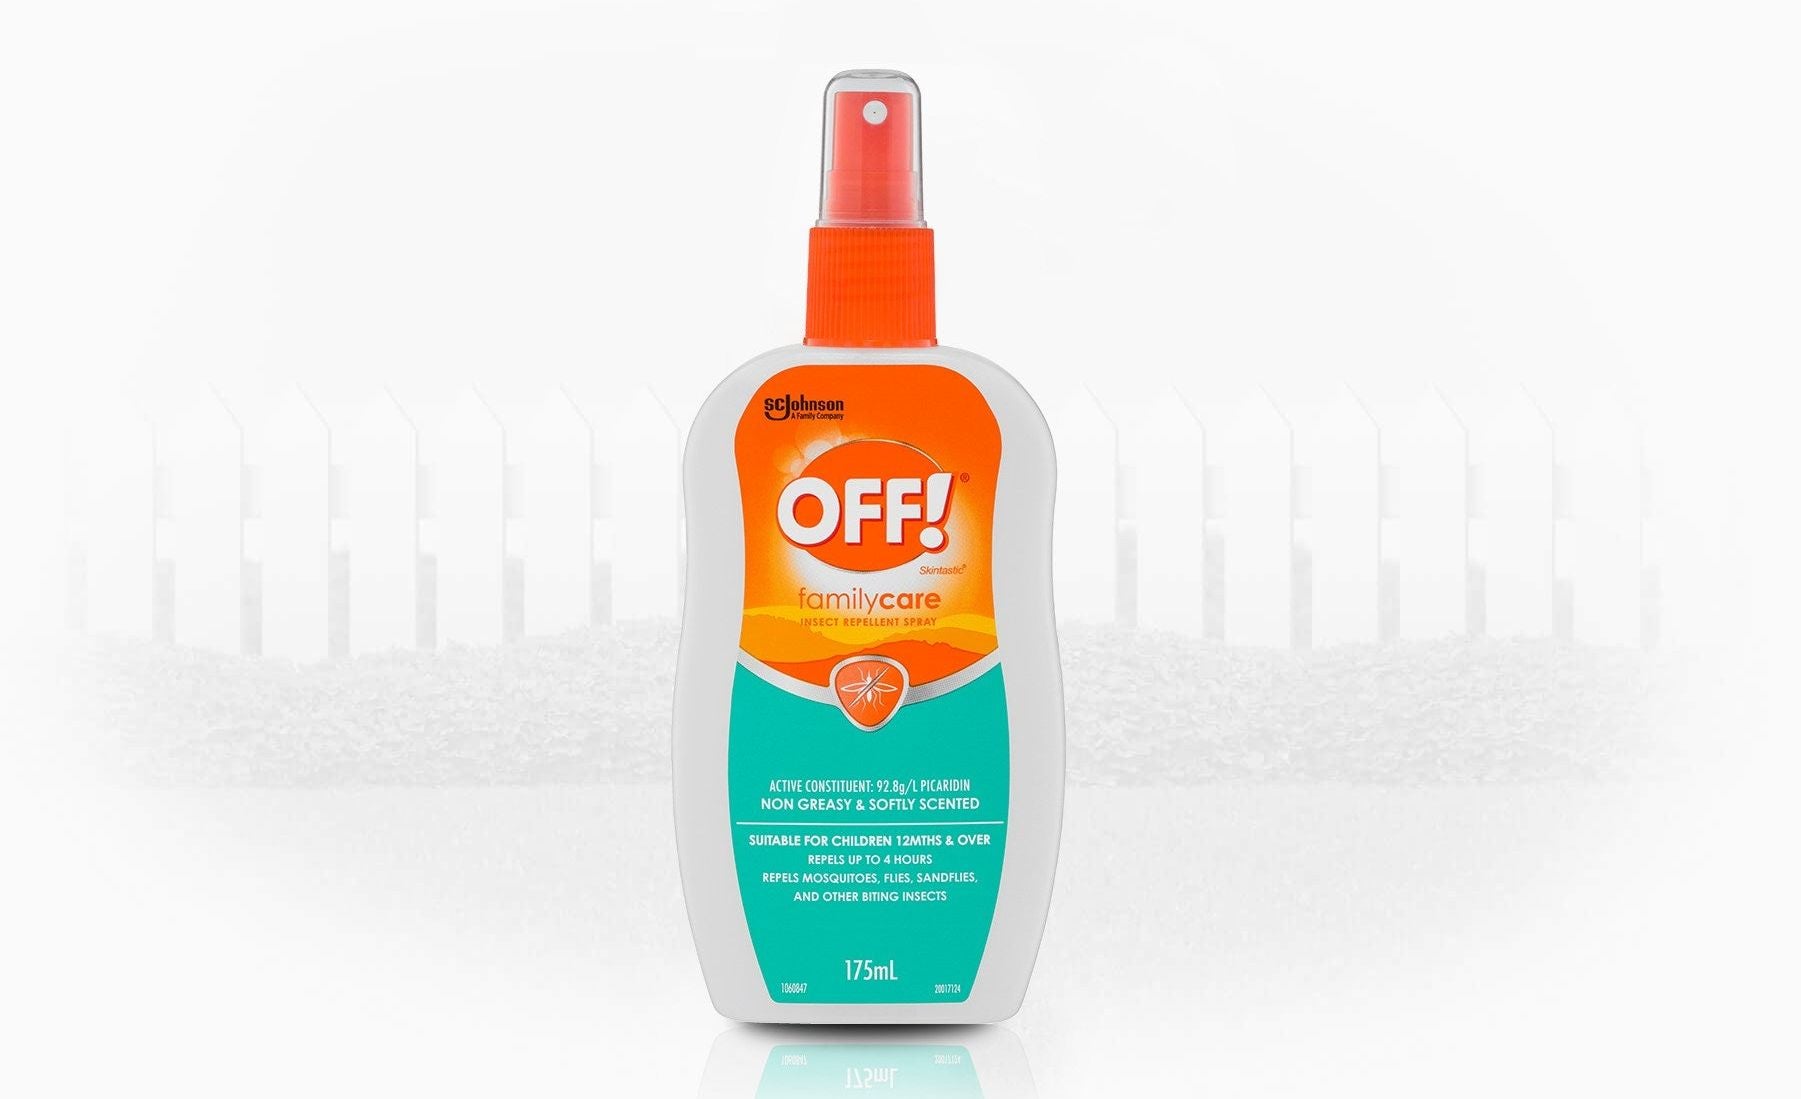 OFF! insect repellent